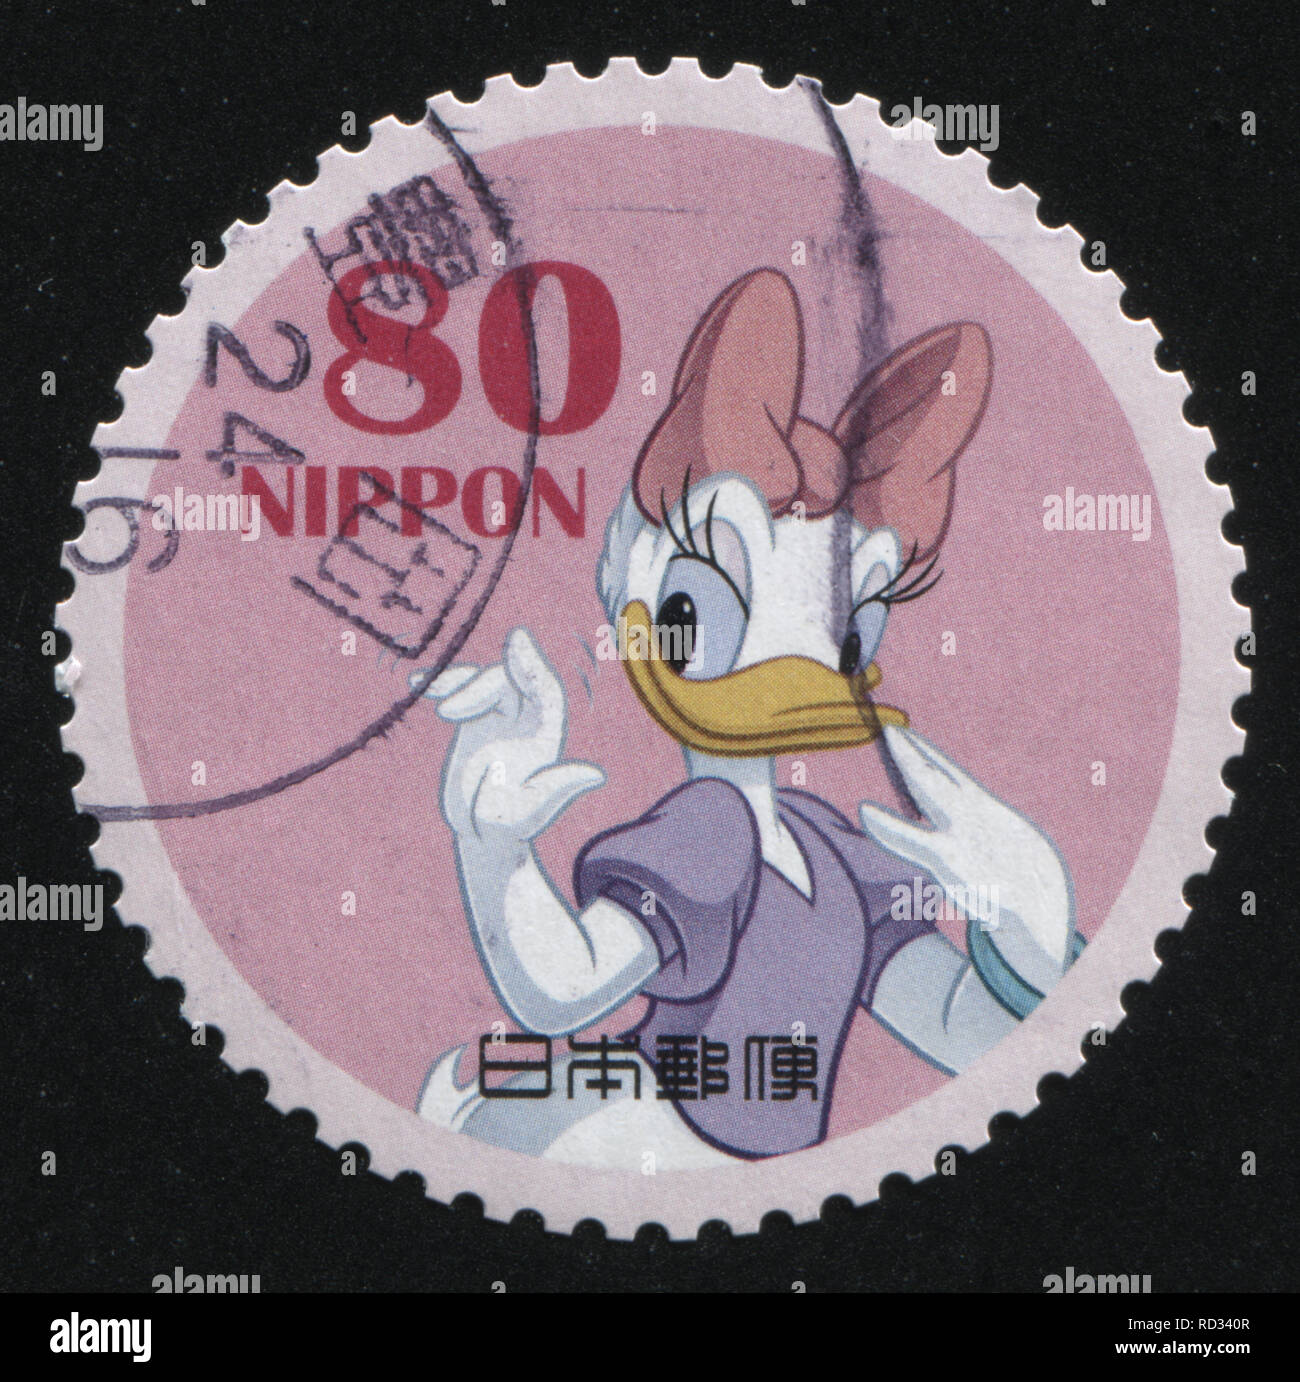 RUSSIA KALININGRAD, 22 APRIL 2016: stamp printed by Japan, shows Daisy Duck waving with her hand, circa 2011 Stock Photo